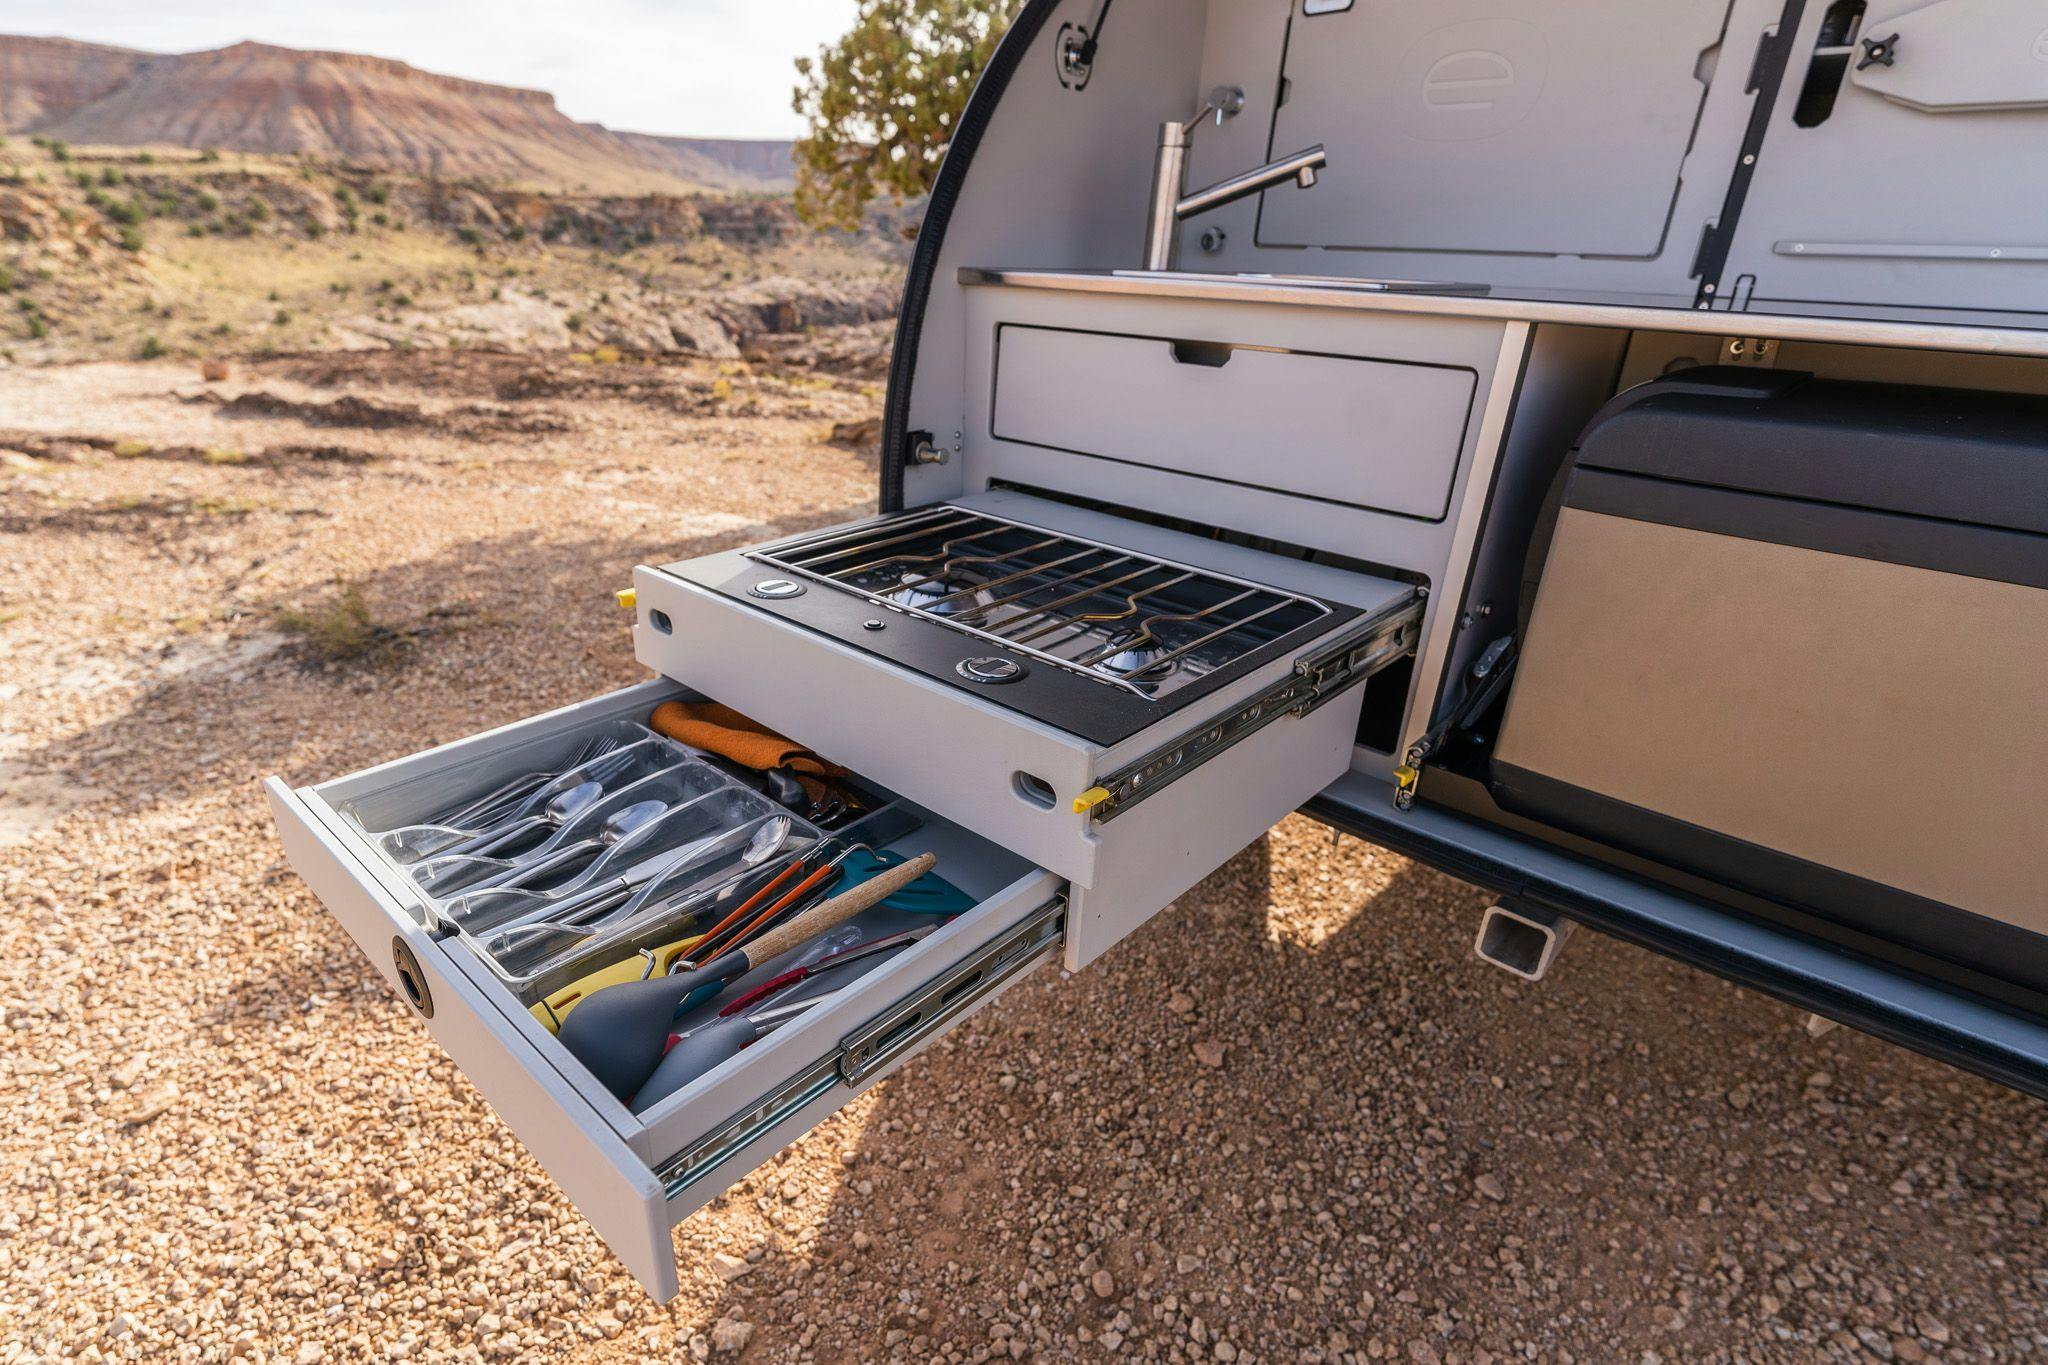 The camp kitchen in the TOPO2, an offroad trailer, showing a two burner stove, utensil drawer, sink, and more.